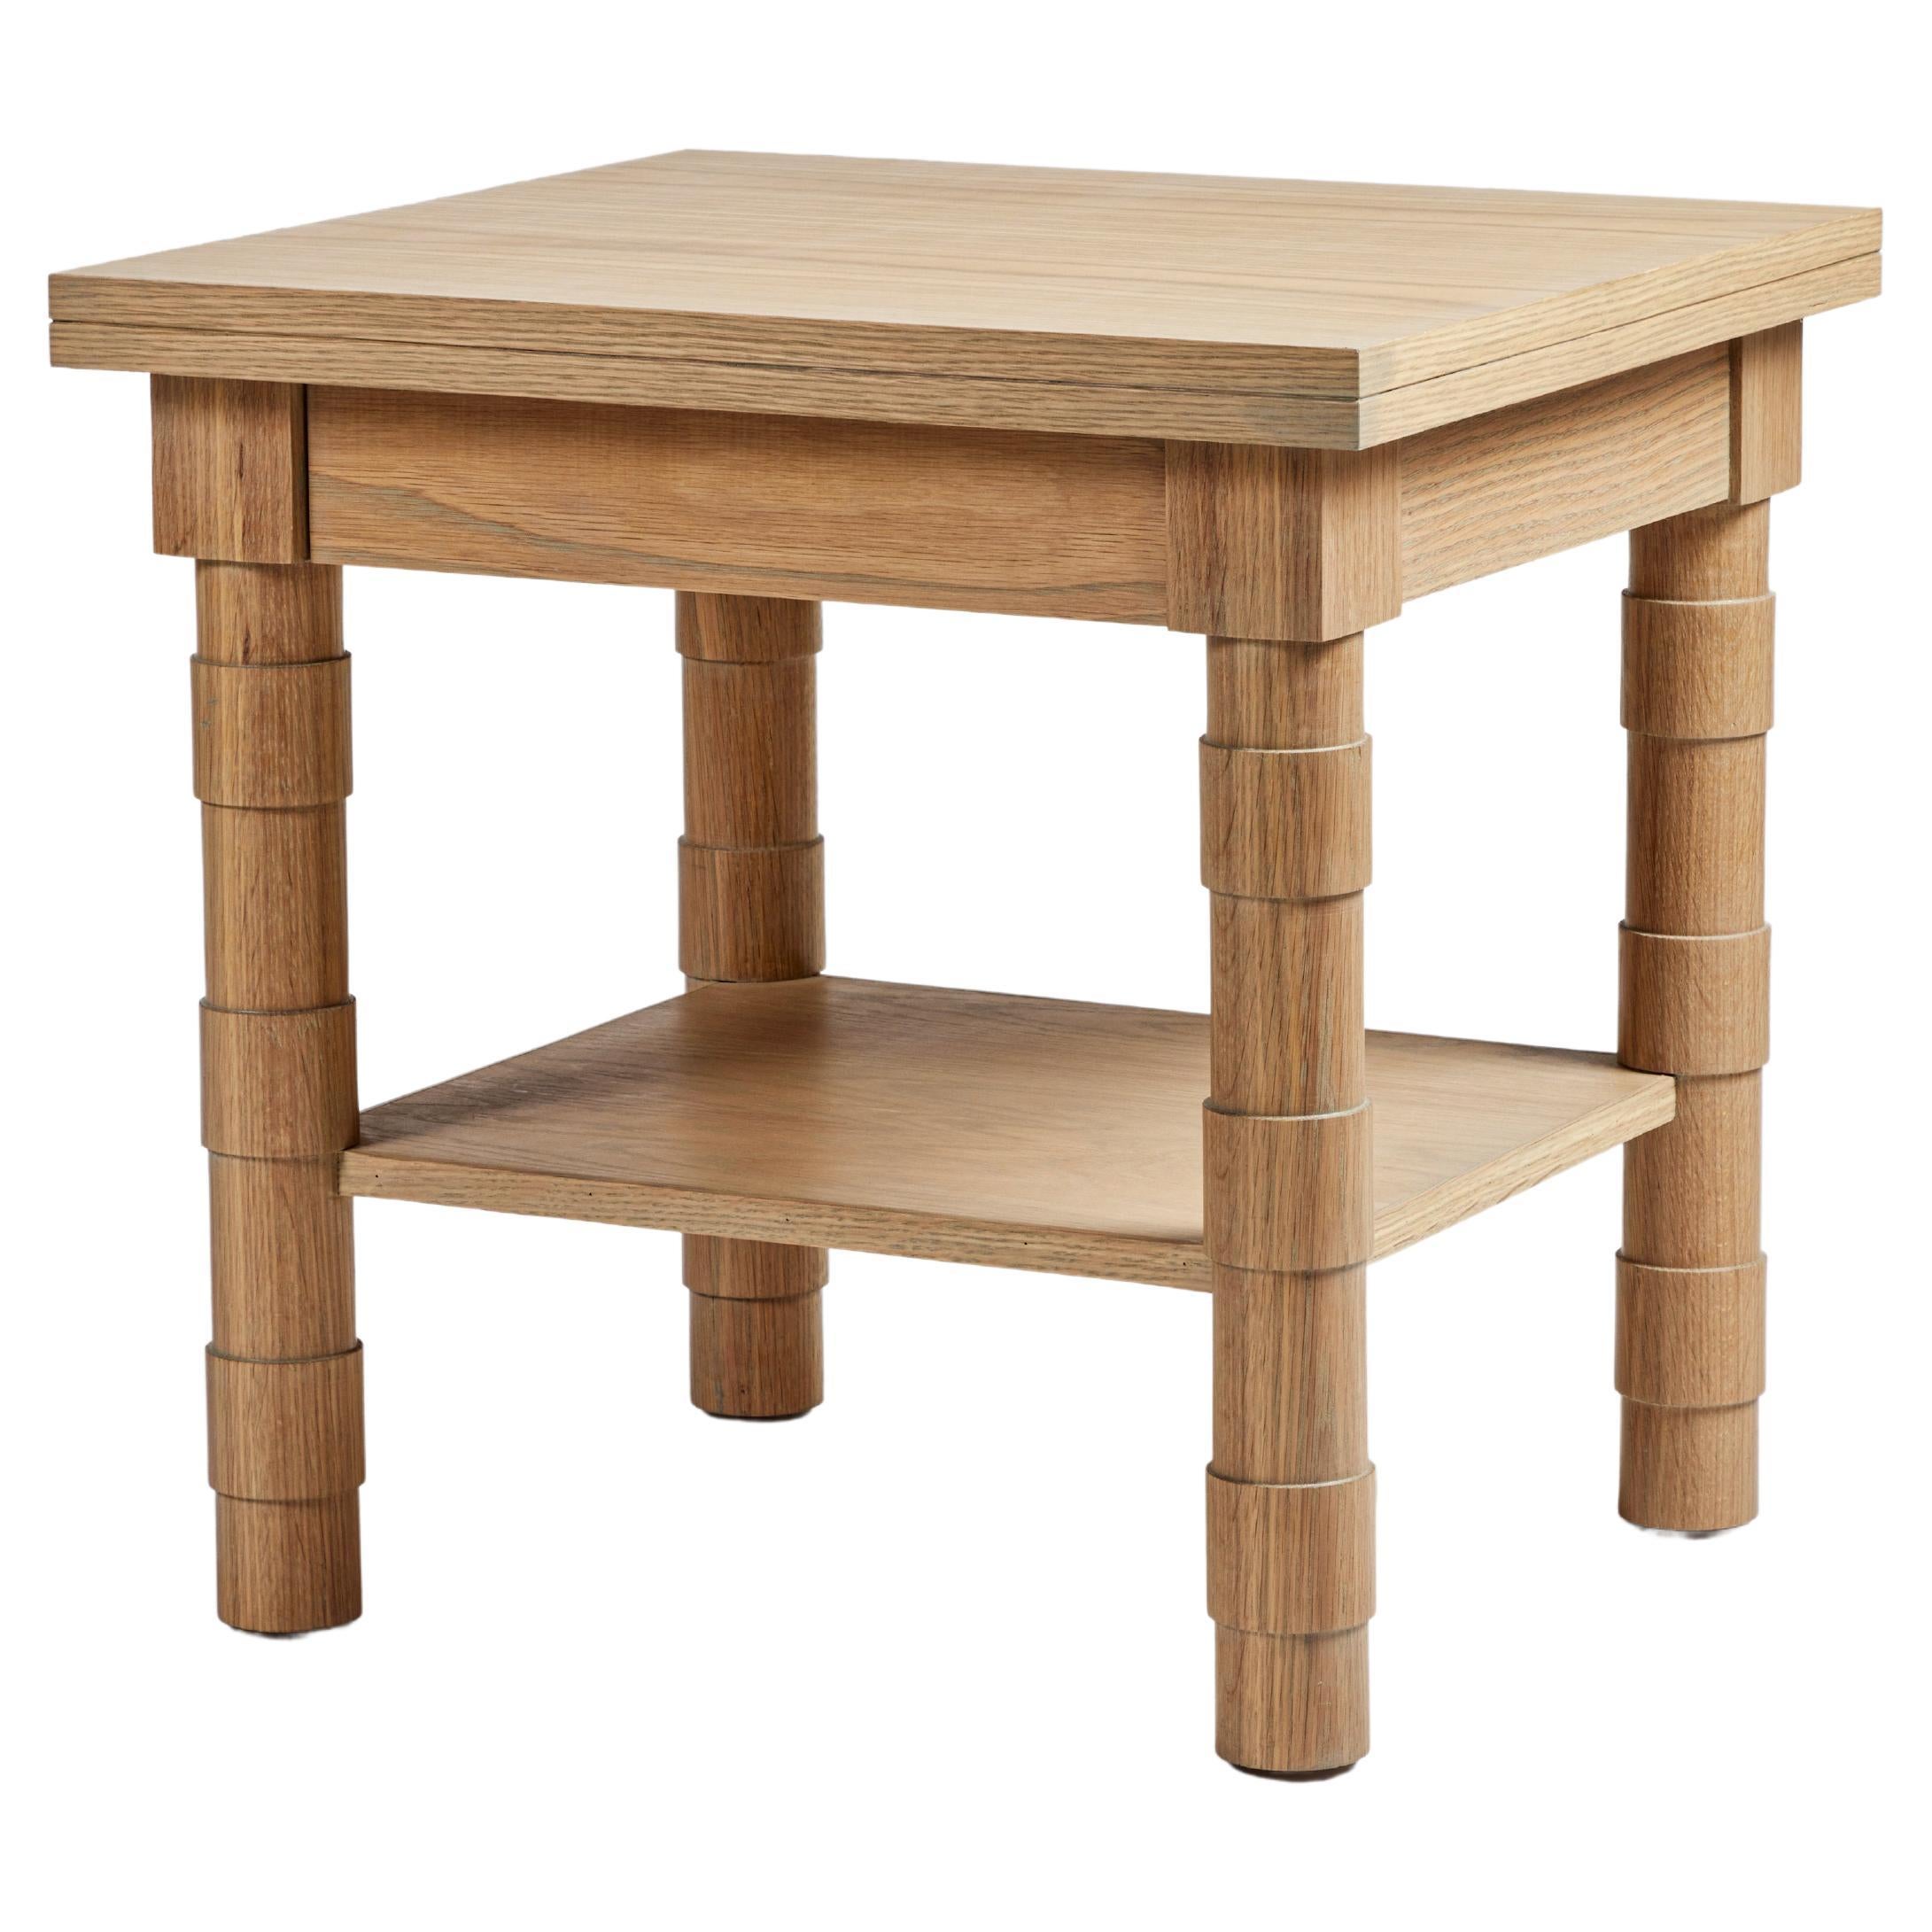 Transitional Turned Leg Jenks Side Table in Oak by Martin and Brockett For Sale